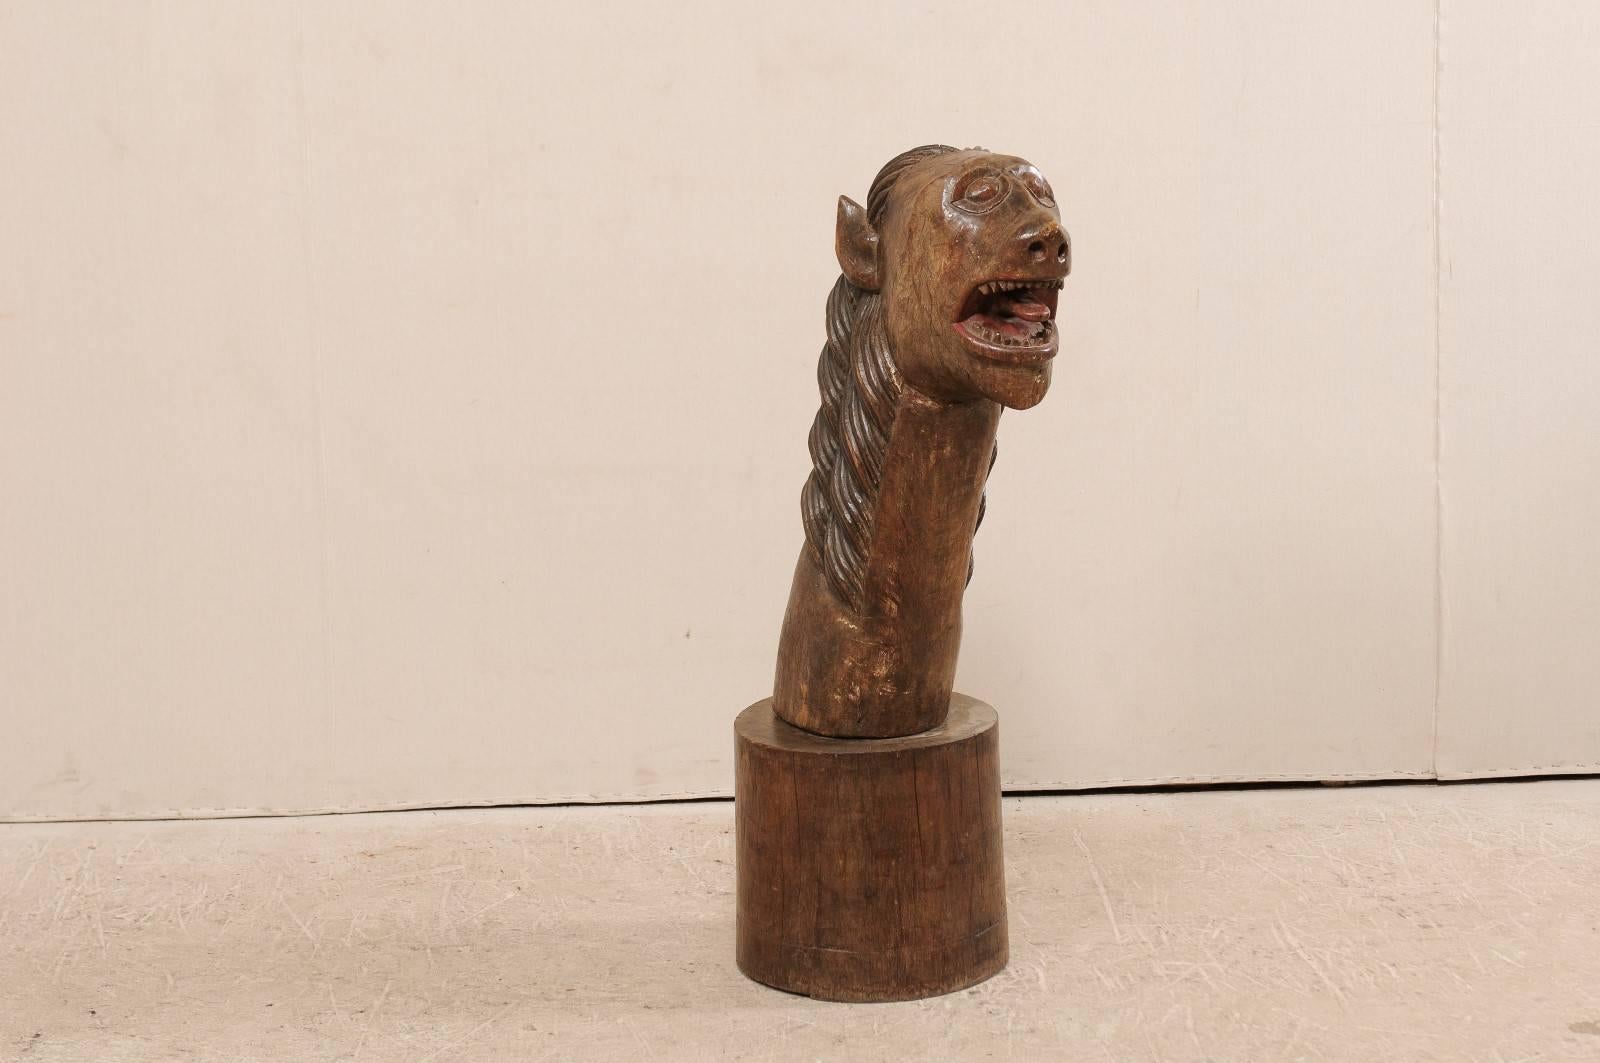 A 19th century Brazilian Folk Art wood sculpture. This antique Brazilian Folk Art piece features a hand-carved figure of a wide-eyed, open mouthed animal with long neck and mane. The animal is displaying a wickedly playful projection of its tongue,